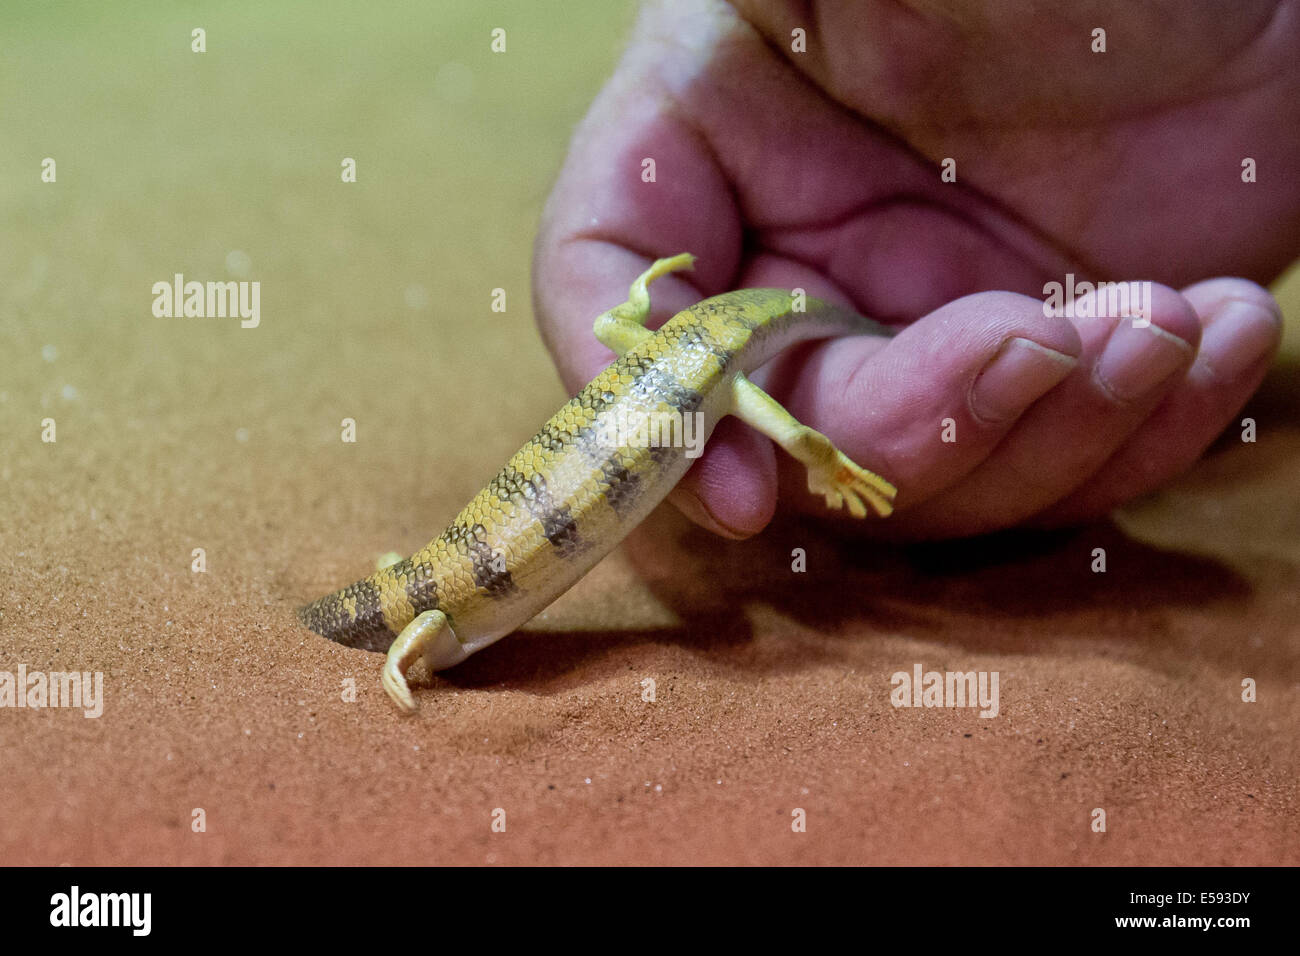 Nuremberg, Germany. 23rd July, 2014. A sandfish, a species of skink, dives into the sand in the new 'Bionicum' in the Tiergarten in Nuremberg, Germany, 23 July 2014. Scientists try to recreate muscles artificially to make robots lighter and more agile. In the new permanent exhibition 'Bionicum' visitors are shown how often engineers are inspired by nature. Photo: Daniel Karmann/dpa/Alamy Live News Stock Photo